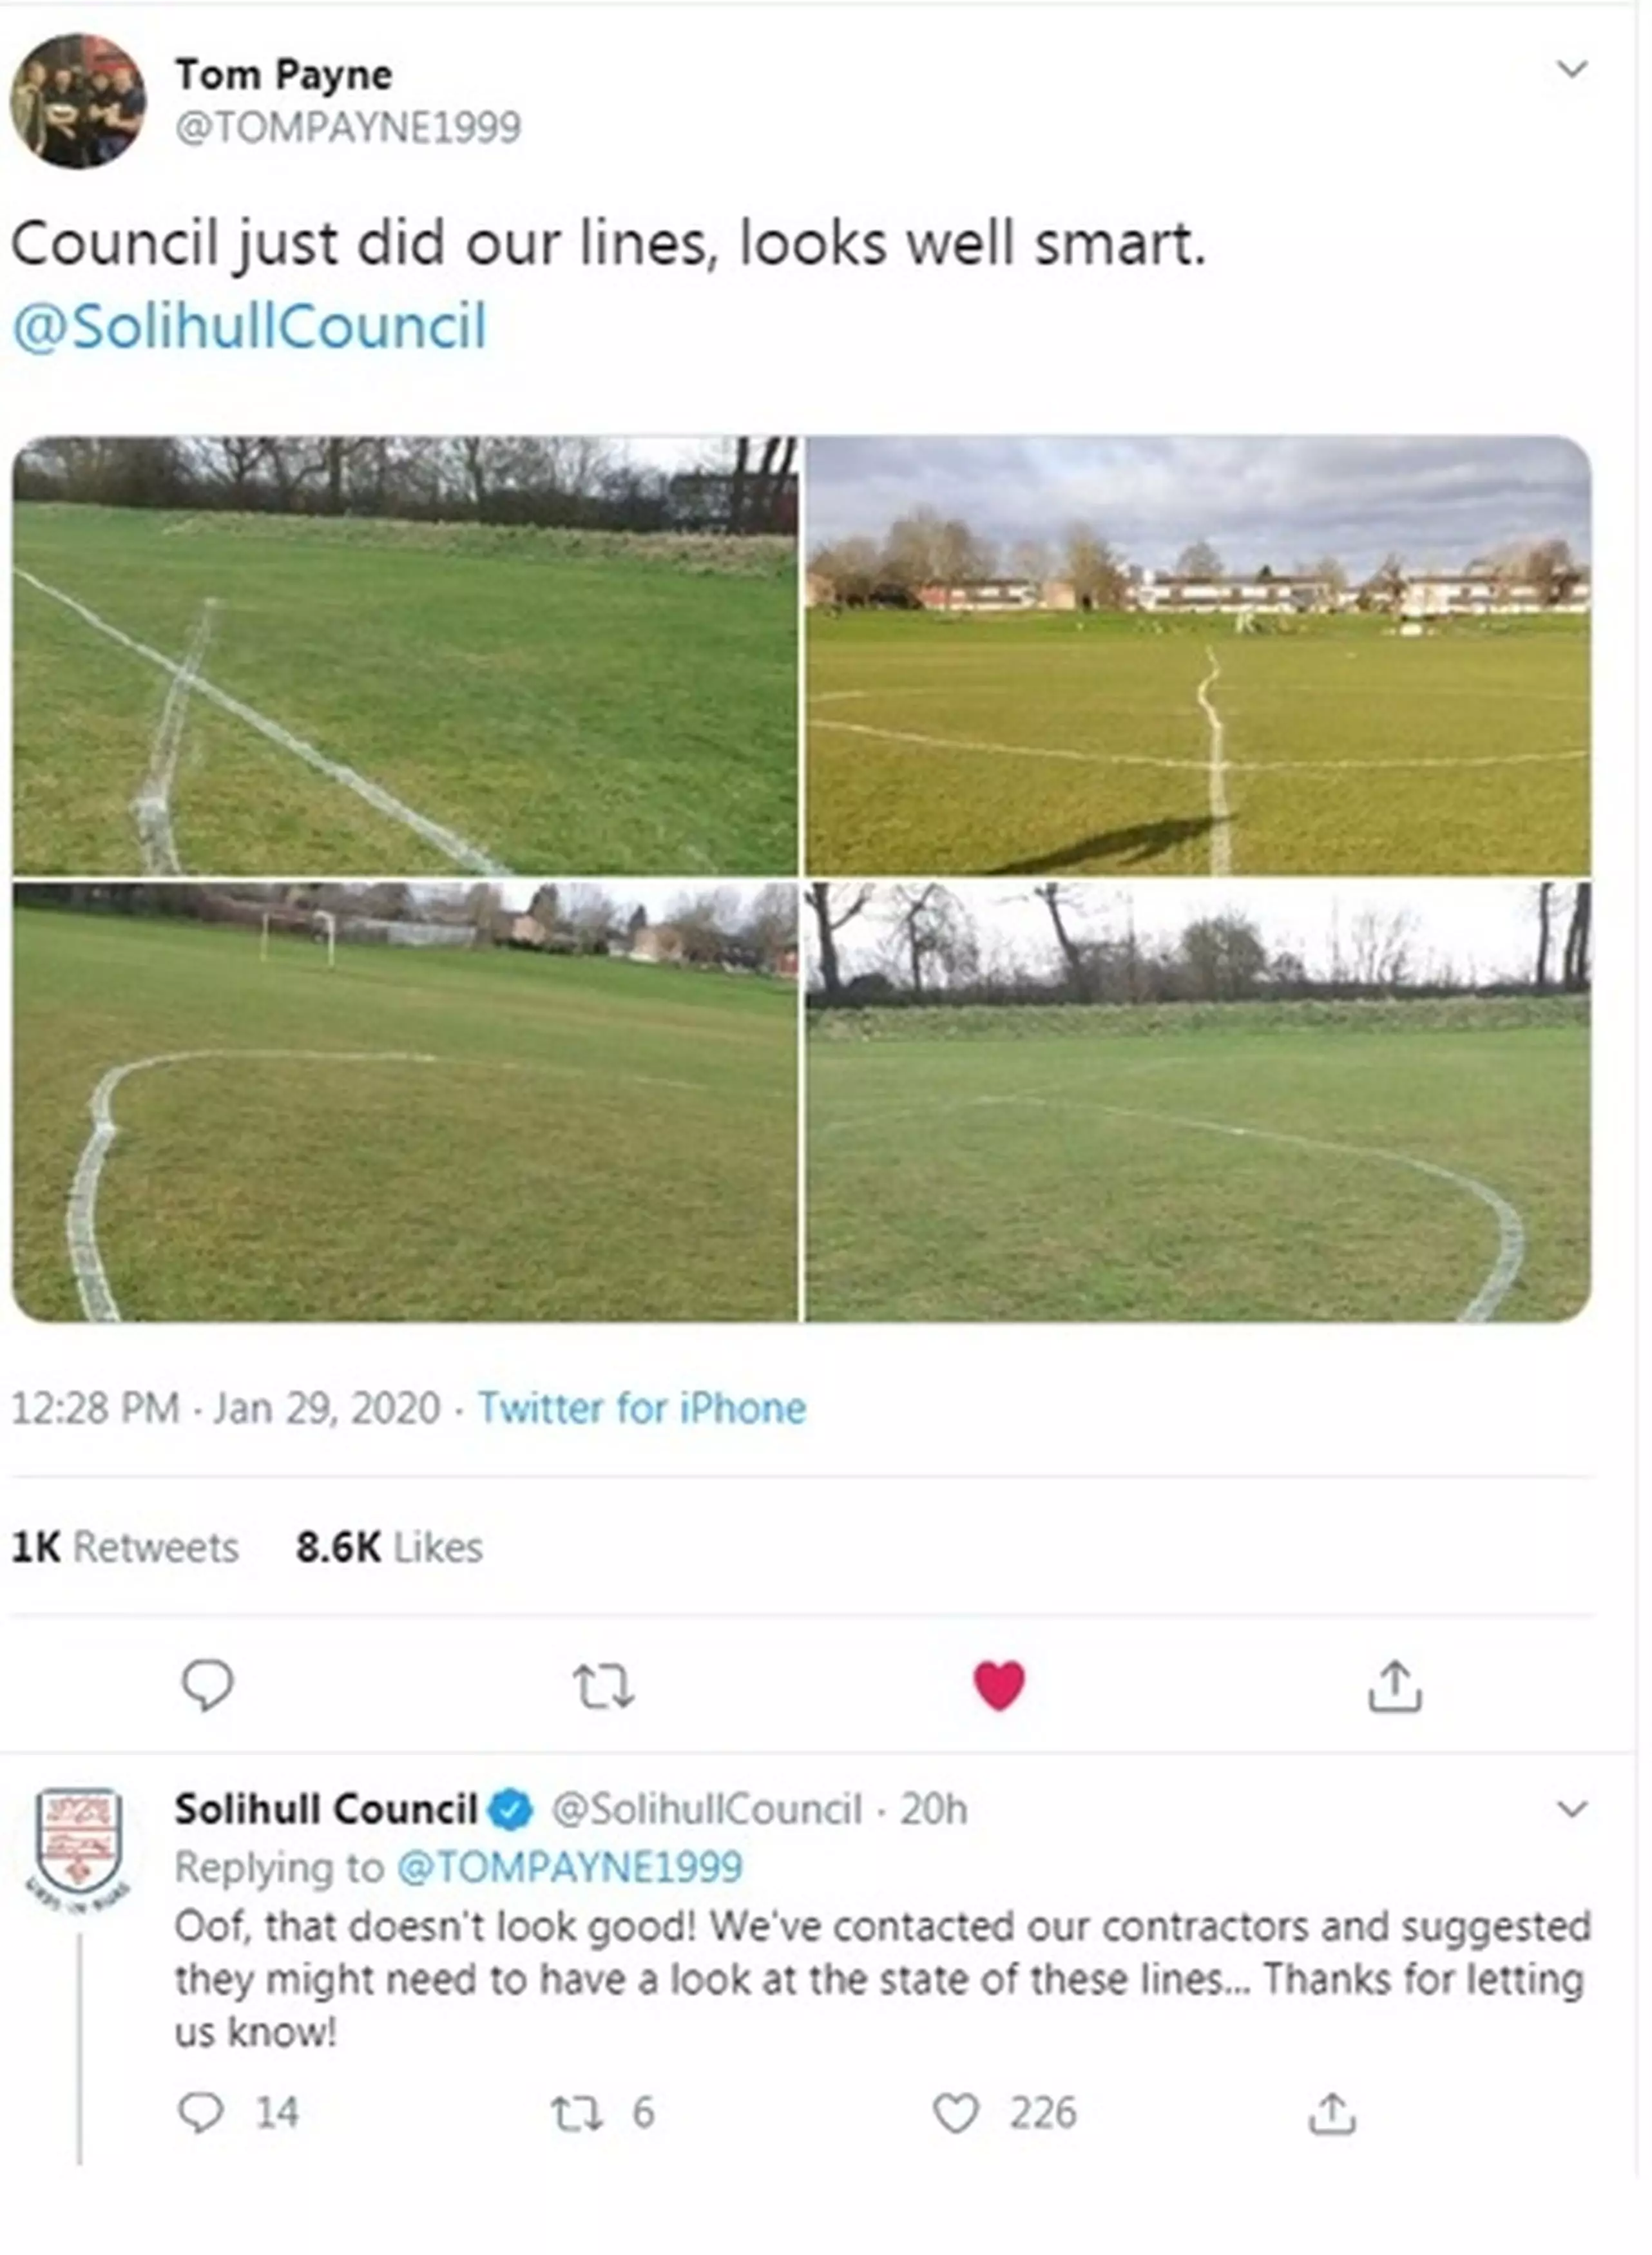 Someone tweeted Solihull Council to bring up the state of the lines.